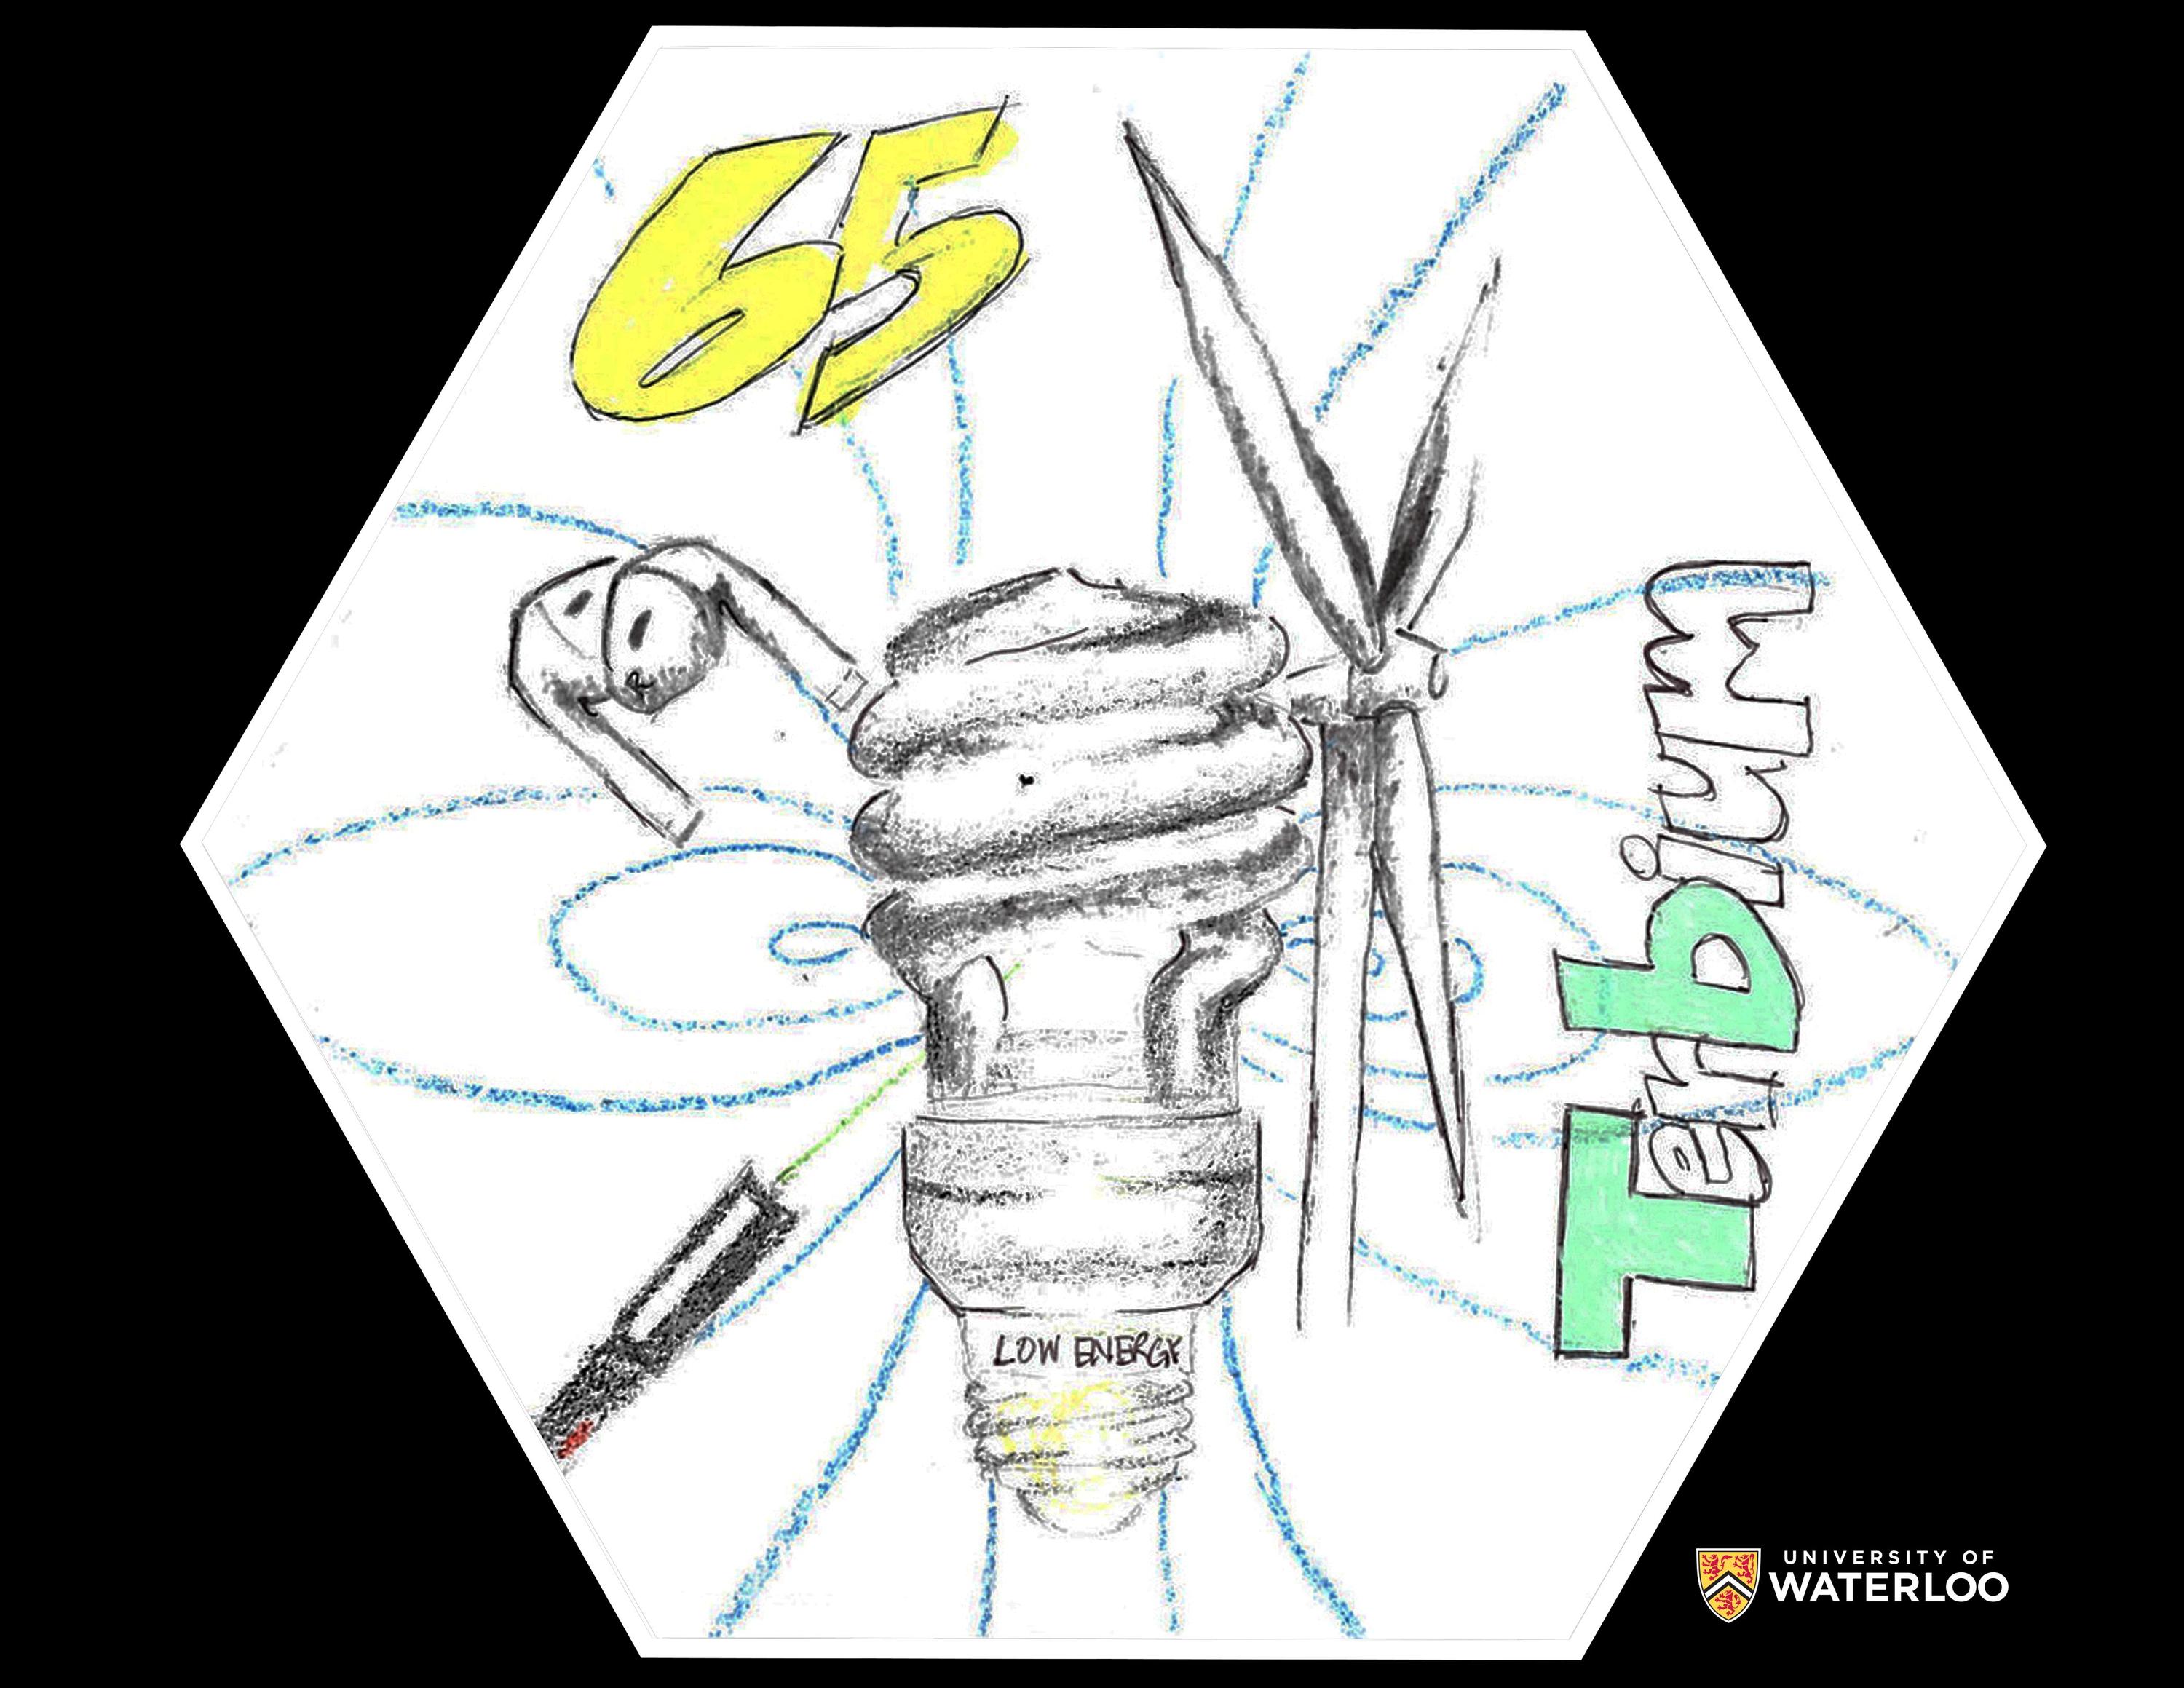 Coloured pencil on paper. In the centre, a low energy lightbulb connected to a wind turbine emits a magnetic field. Right, the word “Terbium”; above, the atomic number “65” in bright yellow lettering. References to medical x-rays and flat speakers also appear.